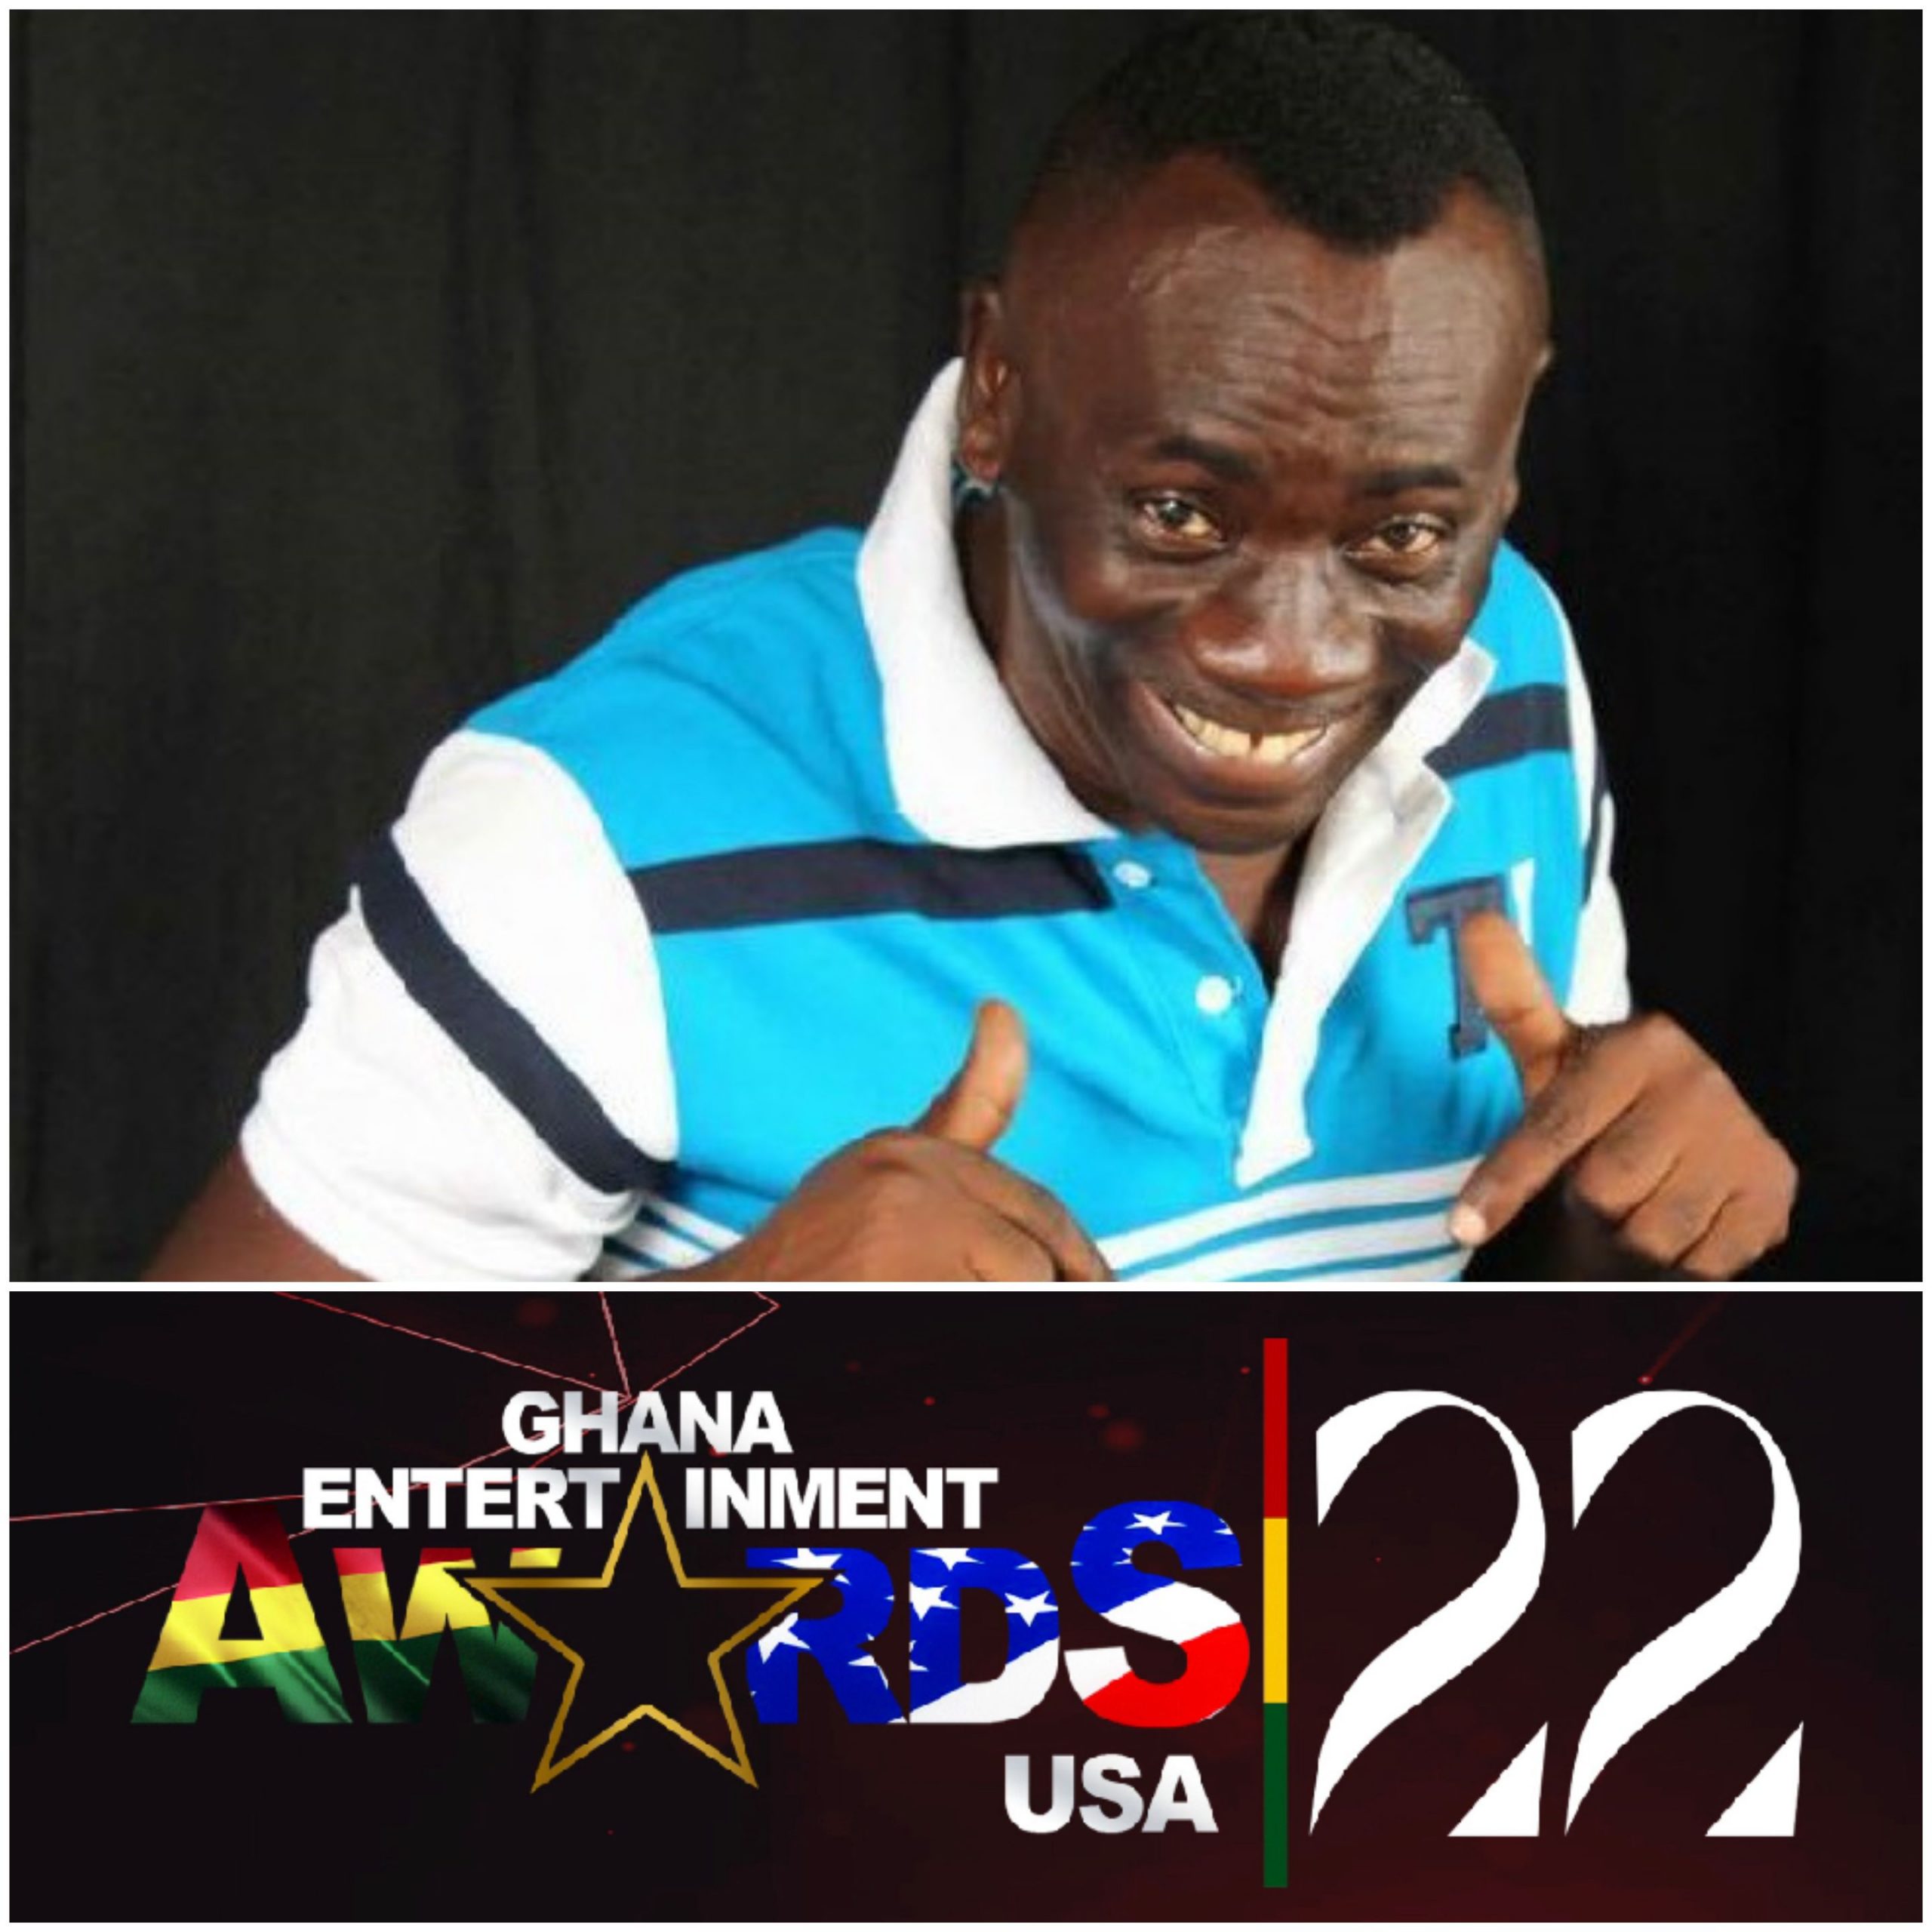 Akrobeto wins Entertainer of the Year at 2022 Ghana Entertainment Awards USA